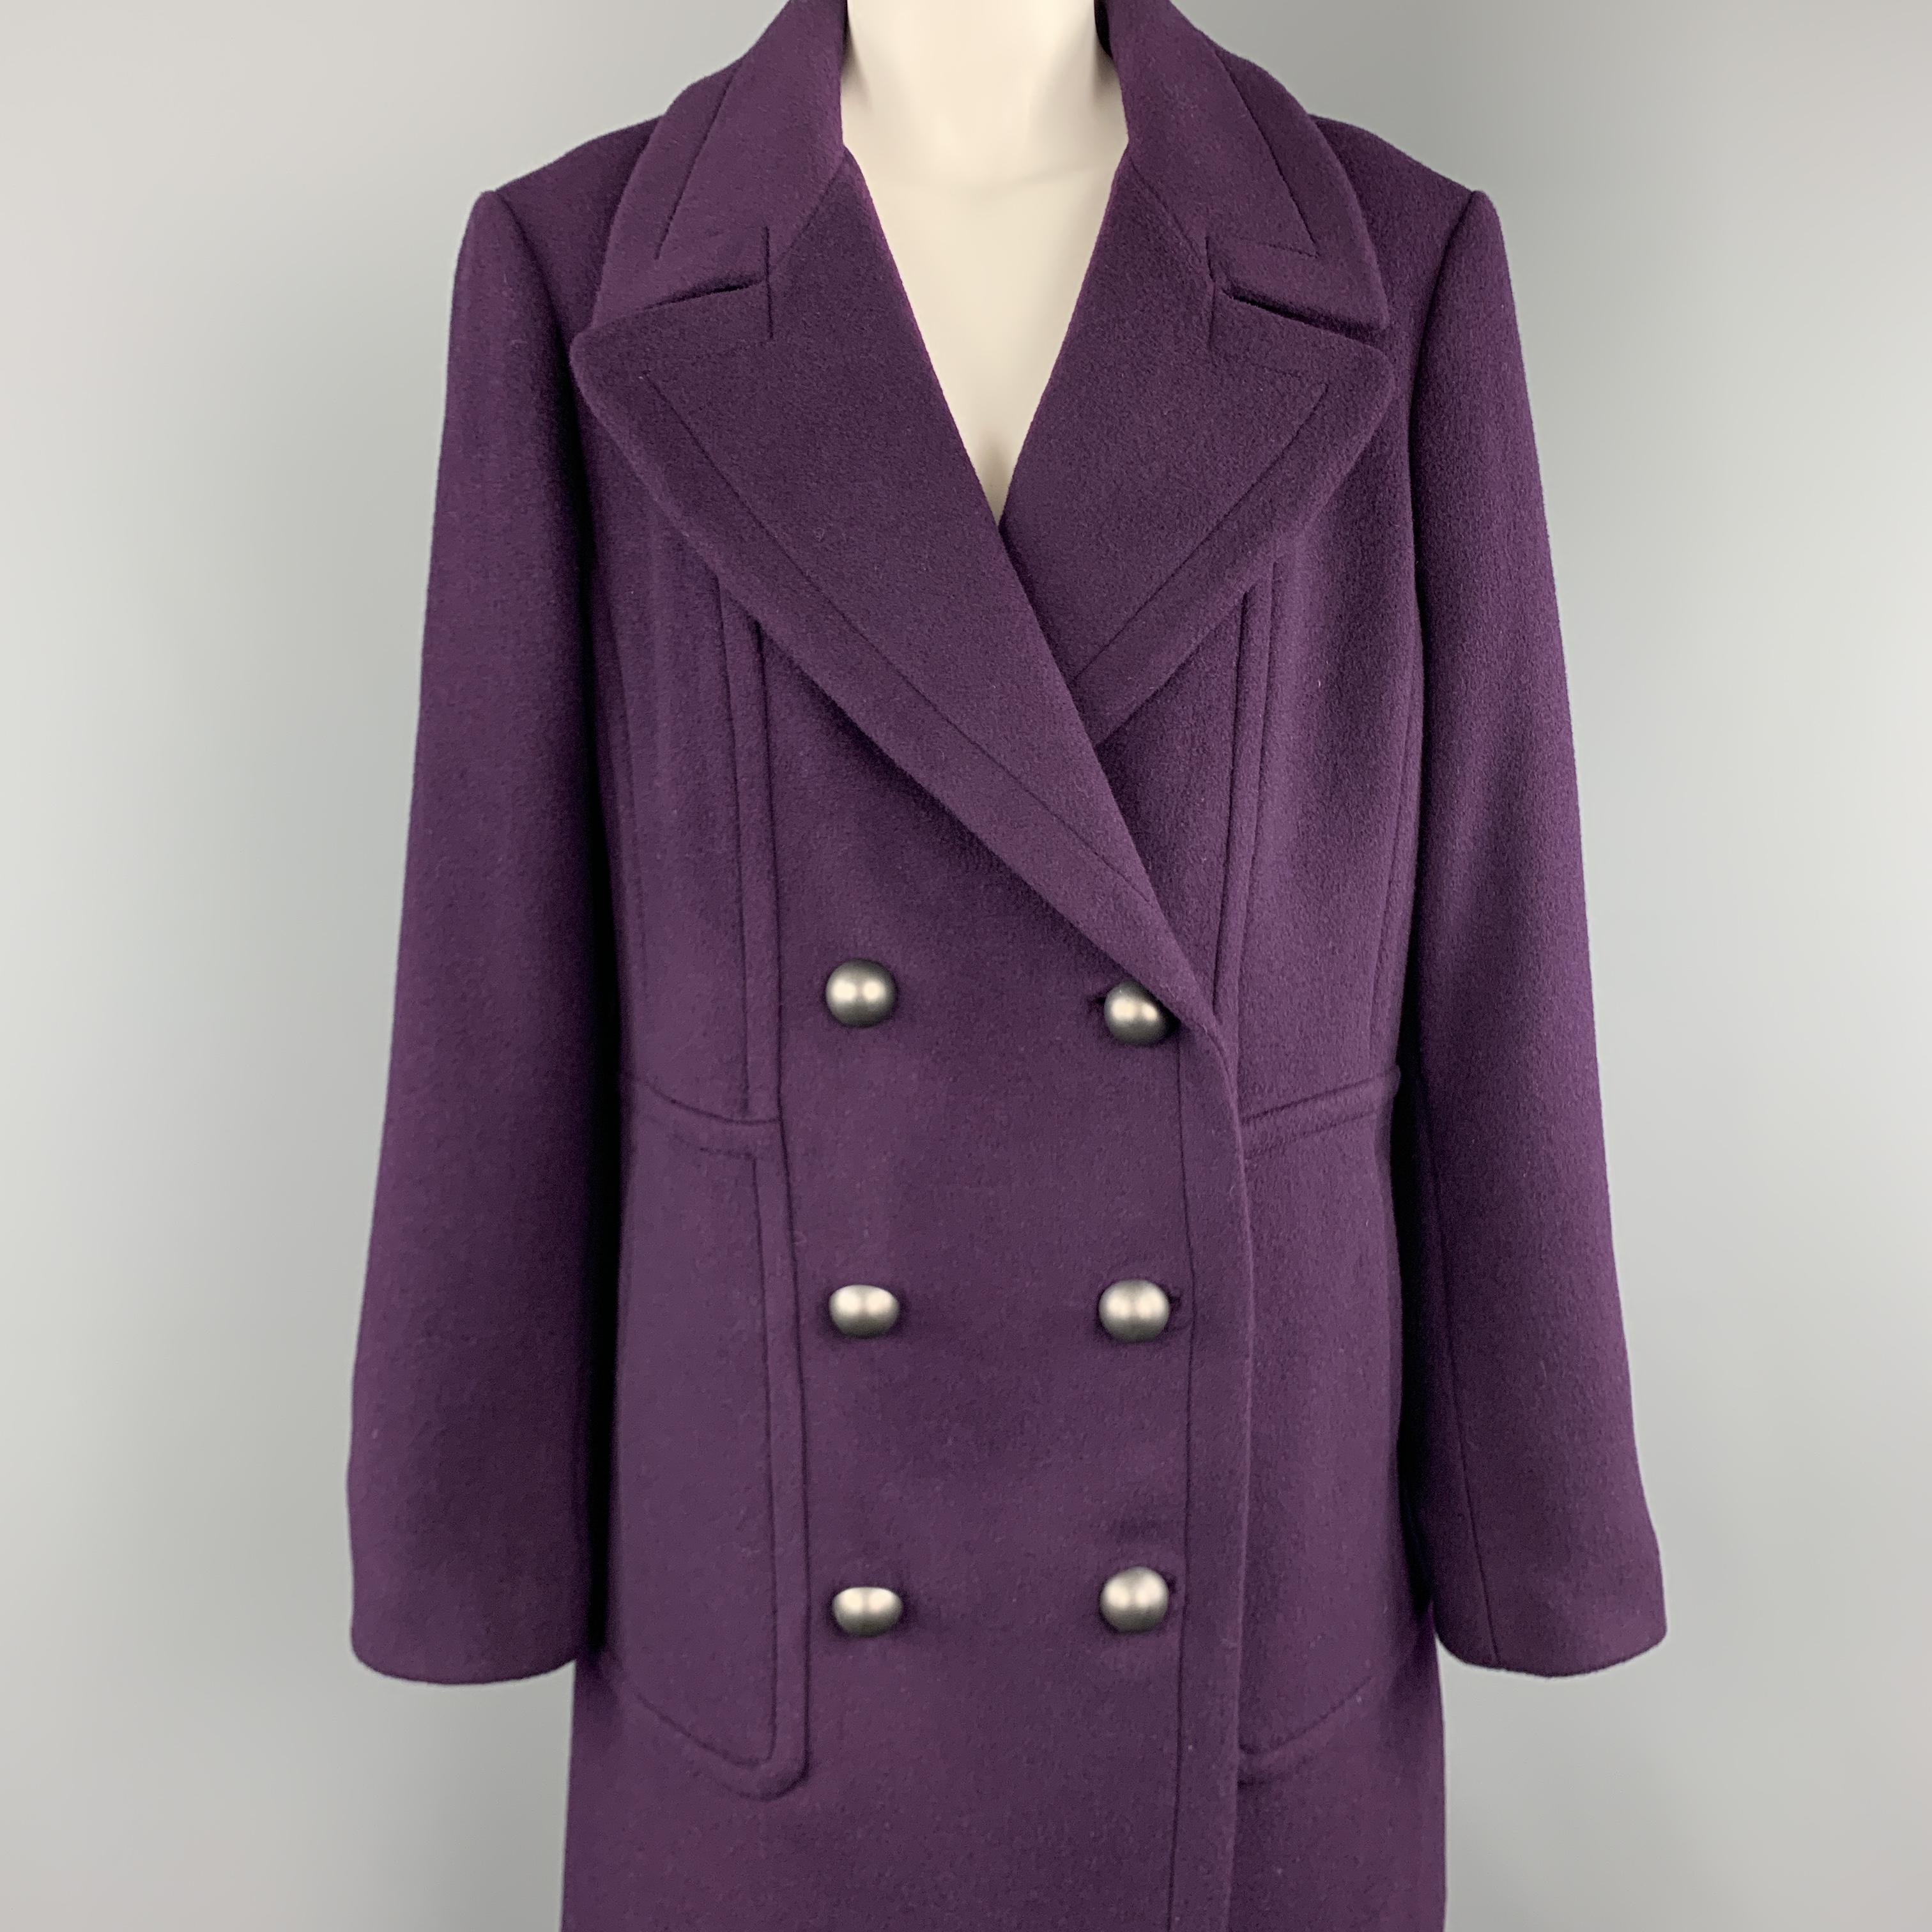 ELIE TAHARI coat comes in plum purple wool blend flannel with a pointed lapel, double breasted metal button front, and slit pockets. 

New with Tags.
Marked: L

Measurements:

Shoulder: 18 in.
Bust: 44 in.
Sleeve: 26 in.
Length: 41 in.